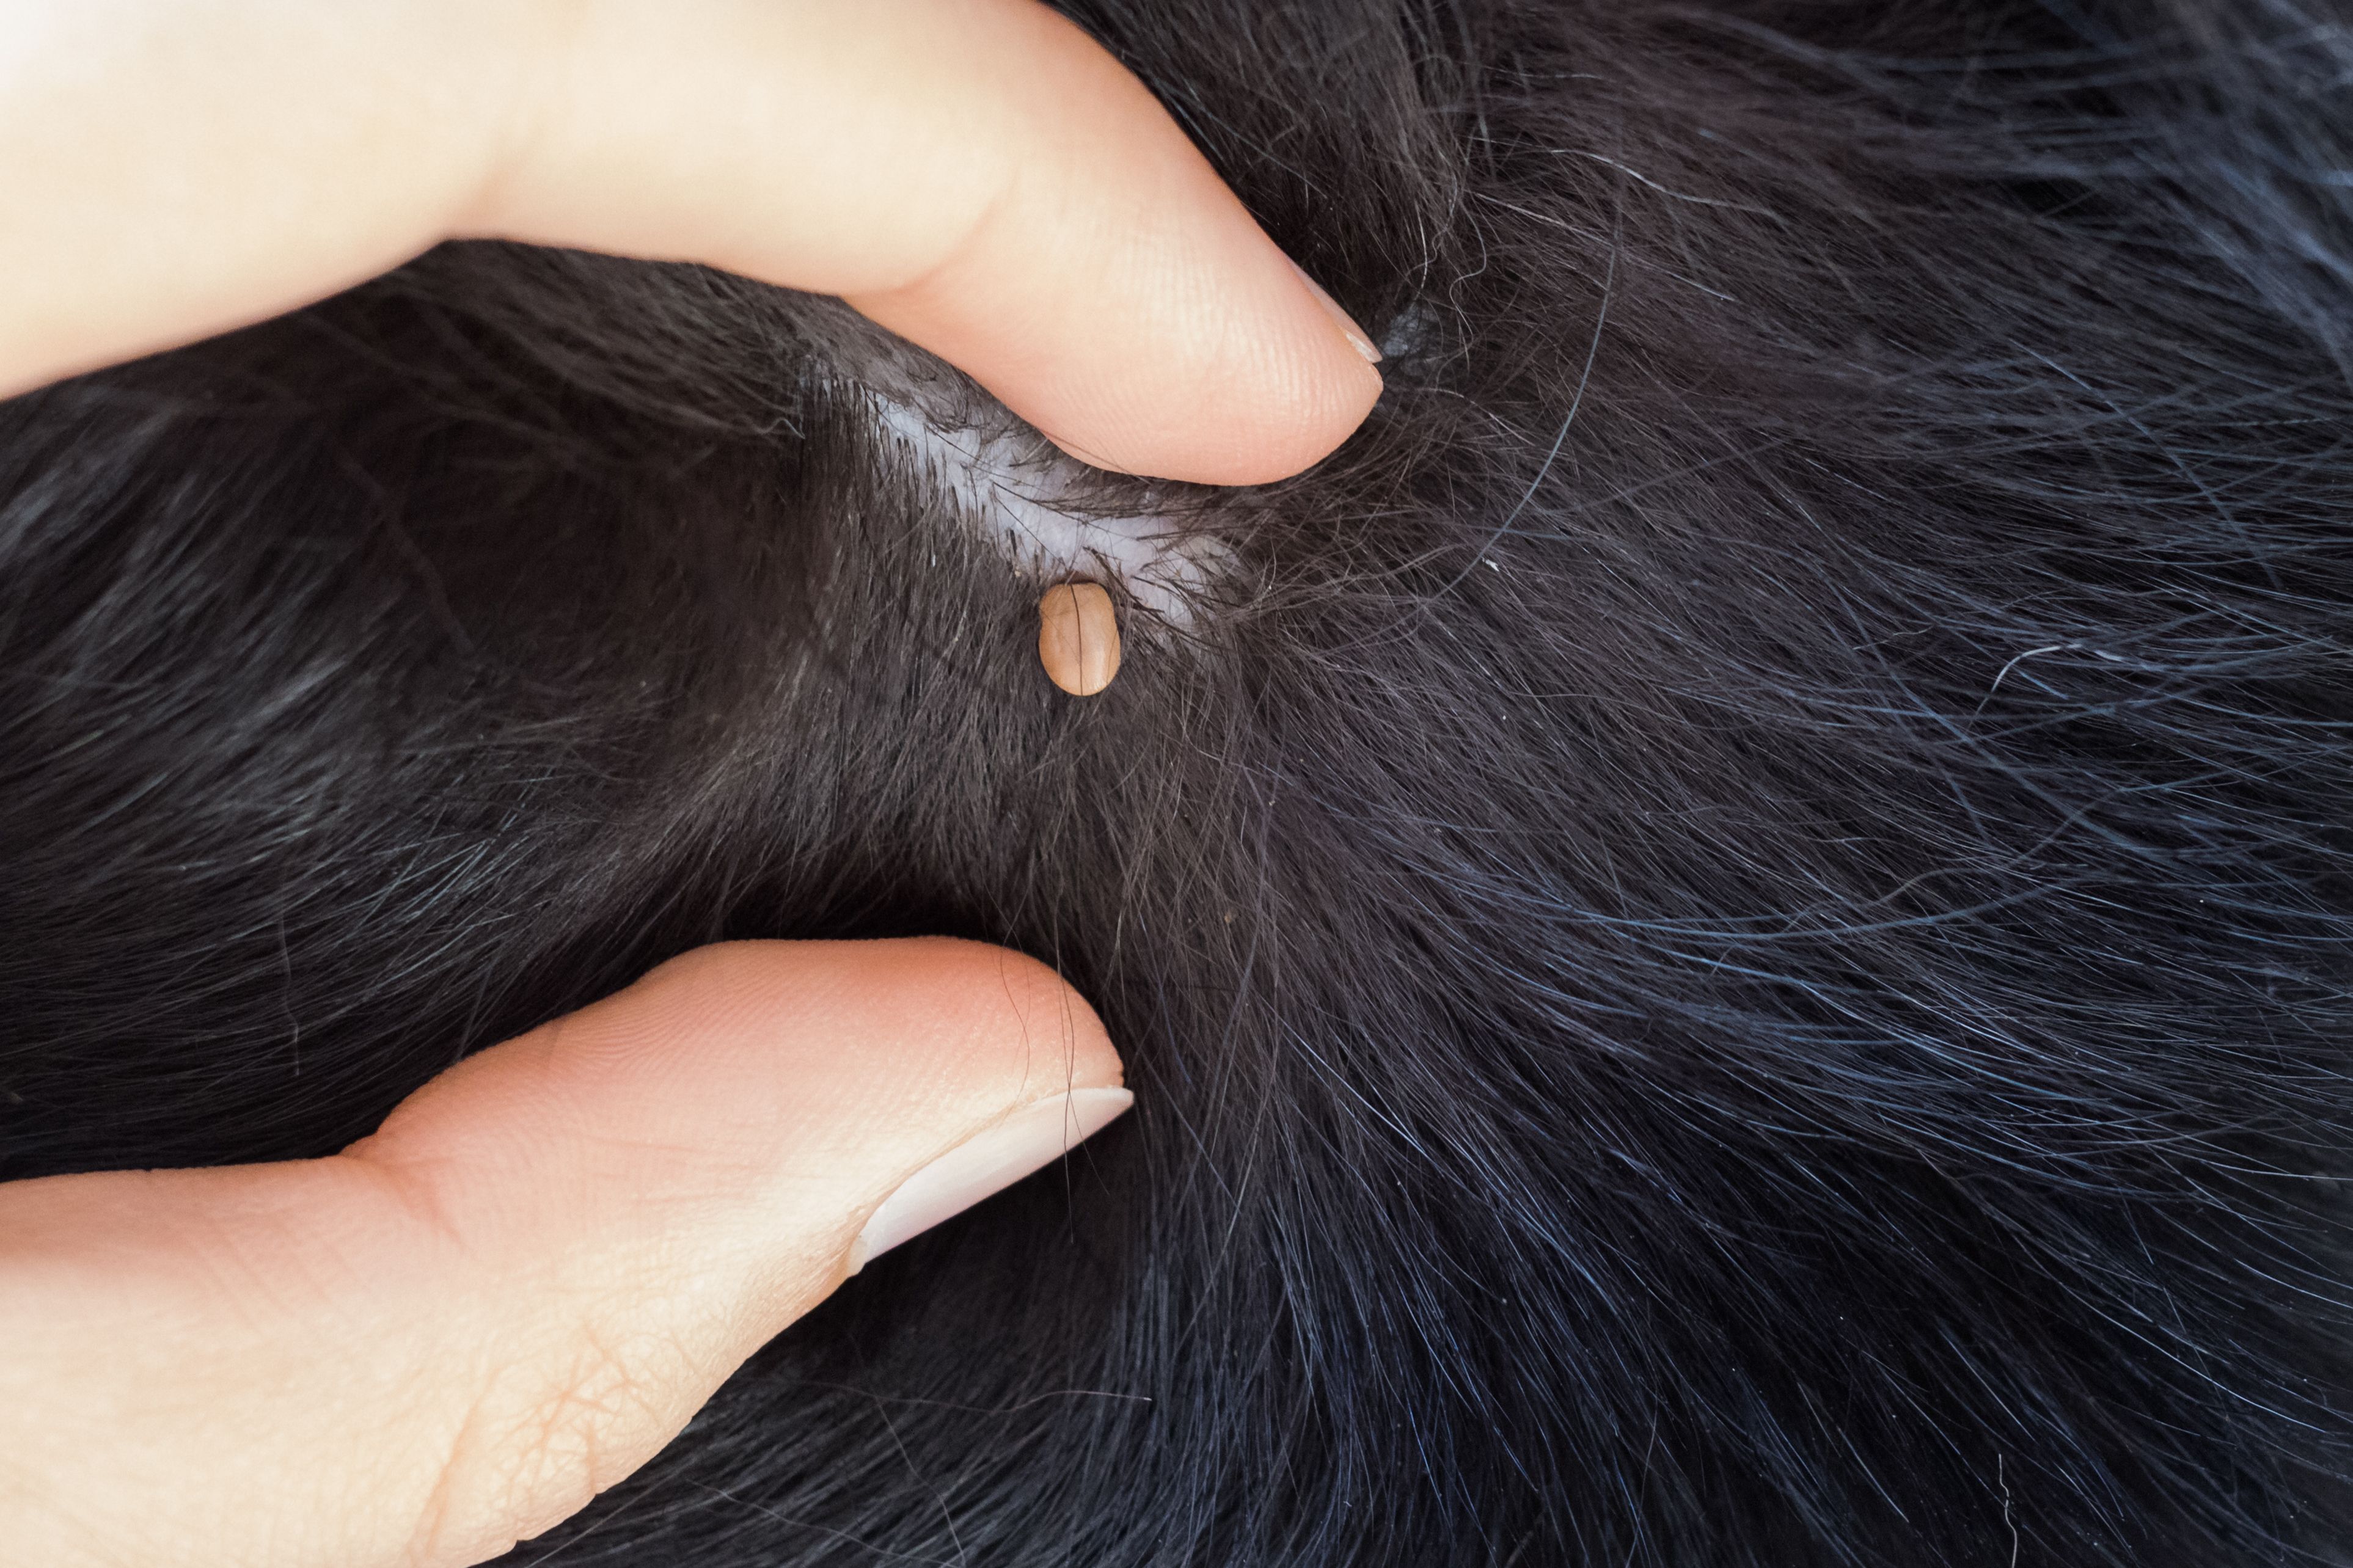 tick on dogs face